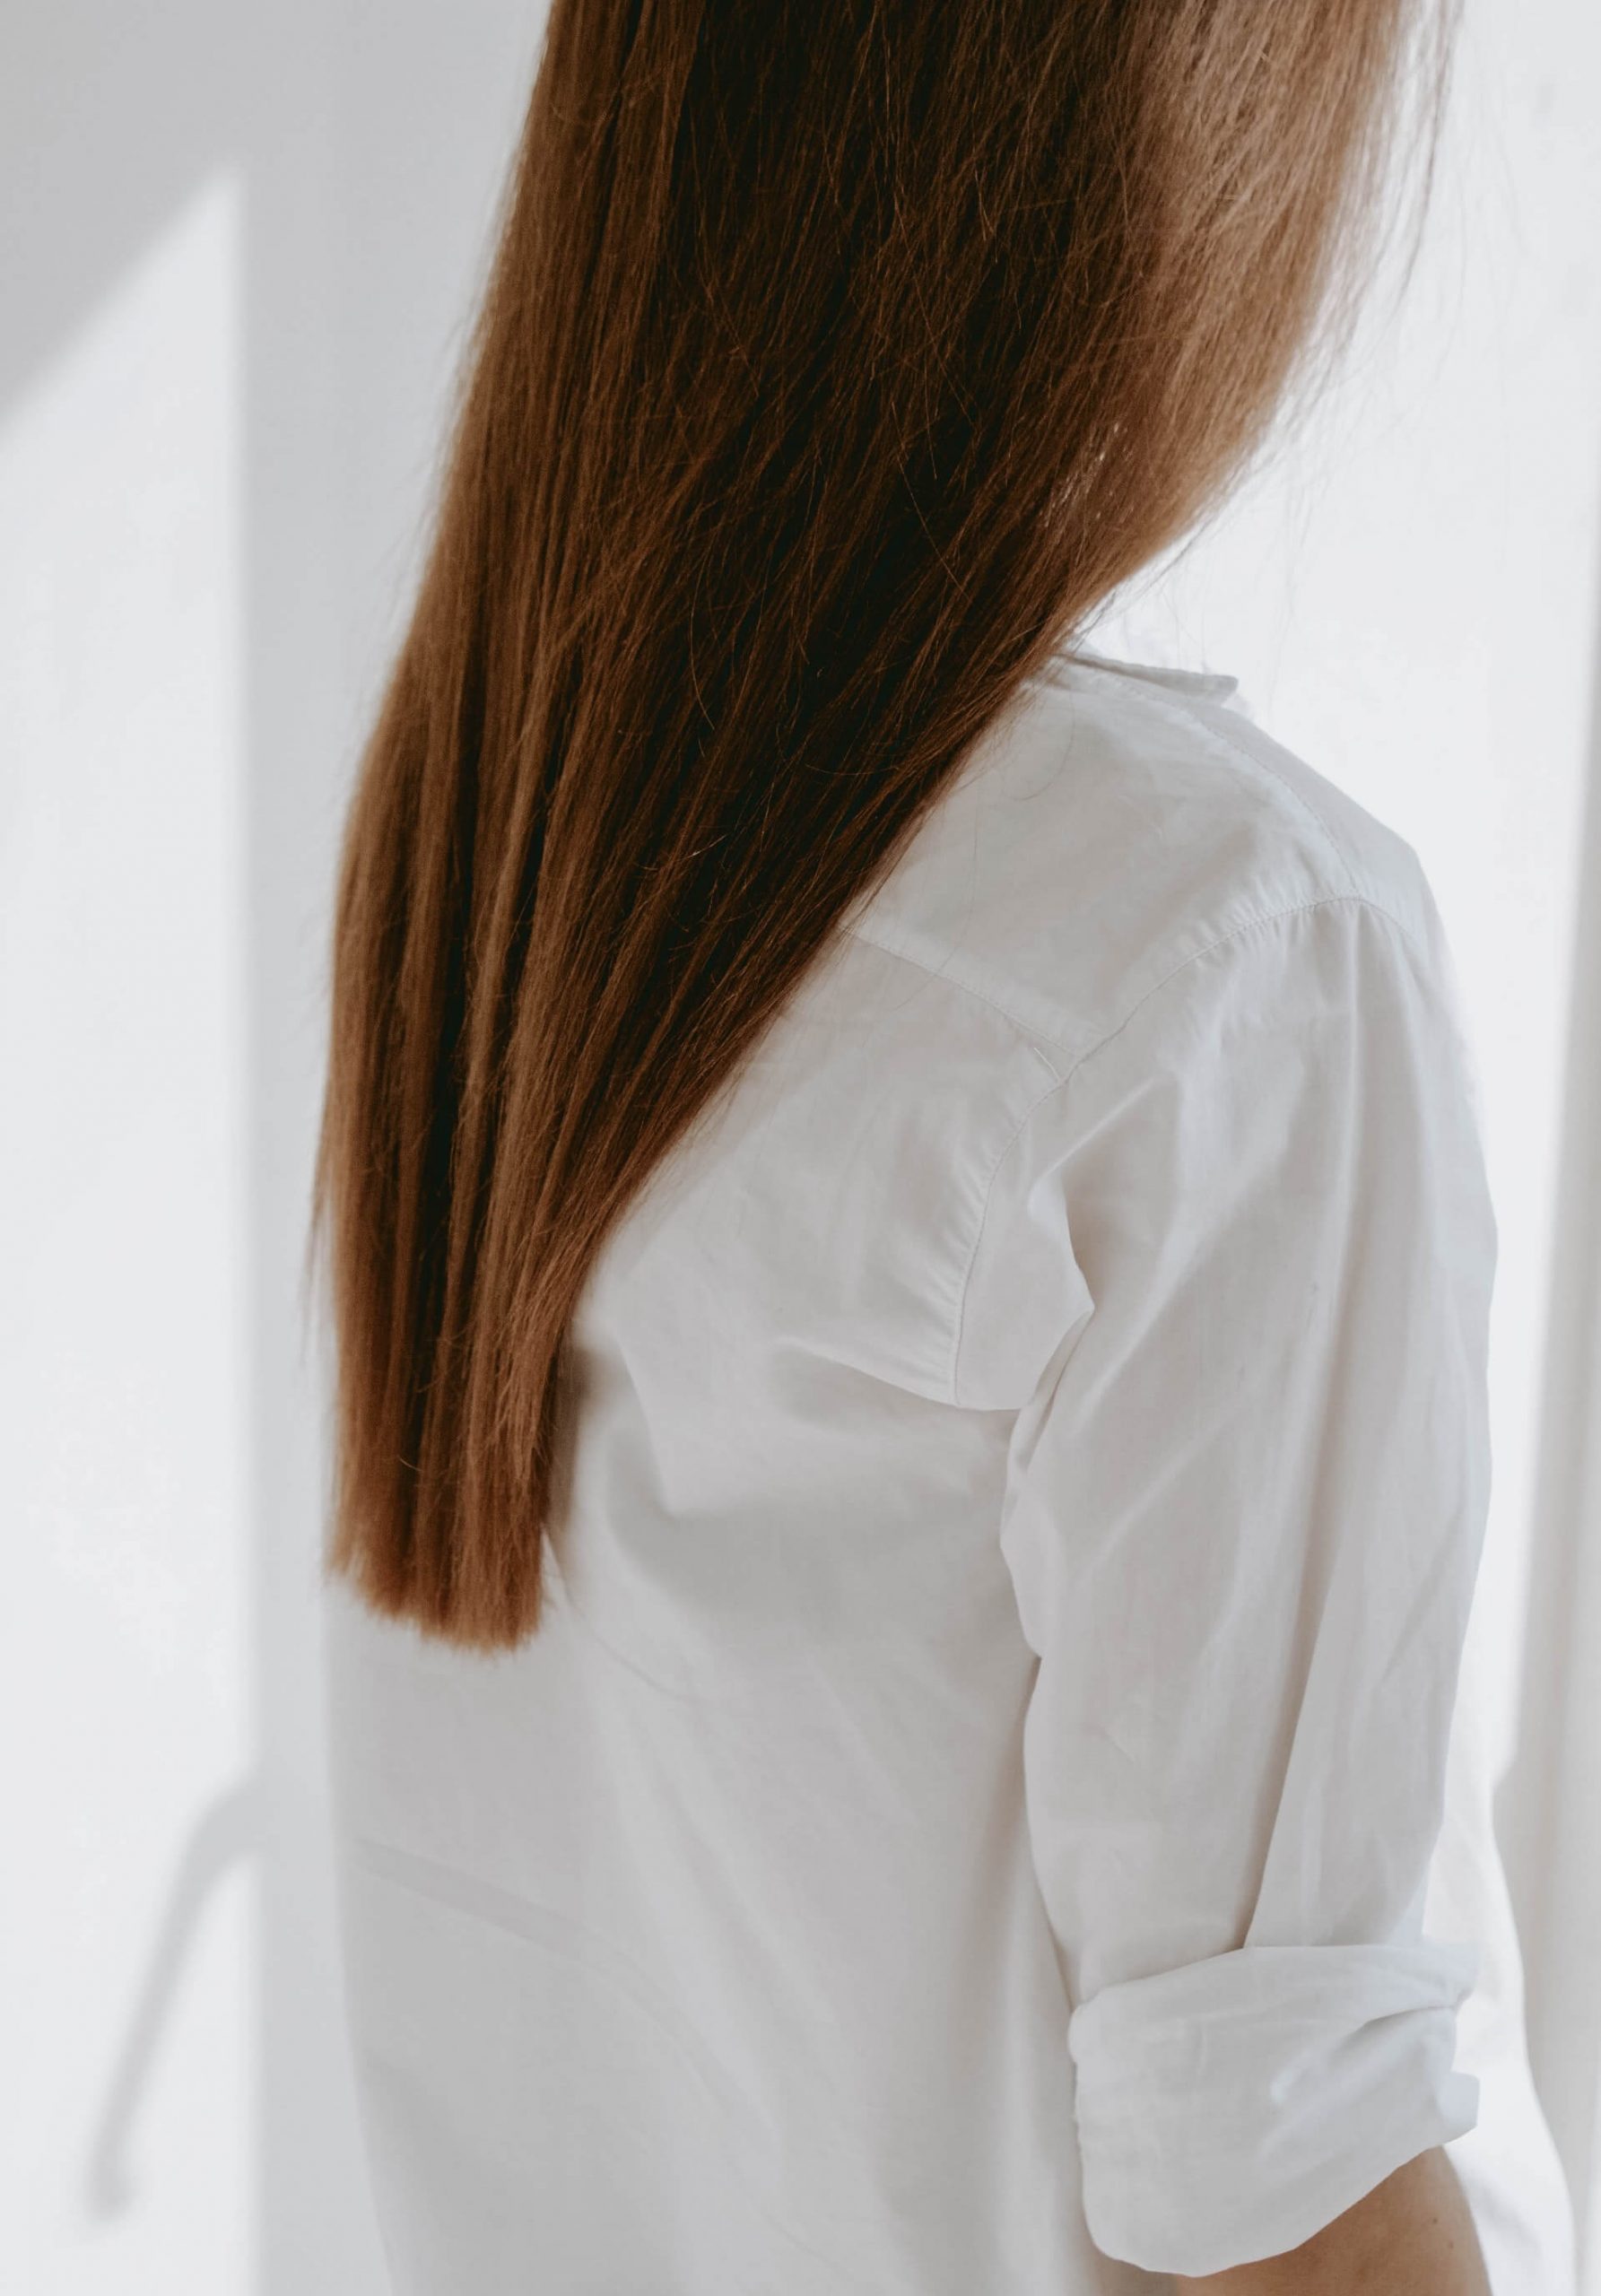 How do I care for my dry hair? Some valuable tips